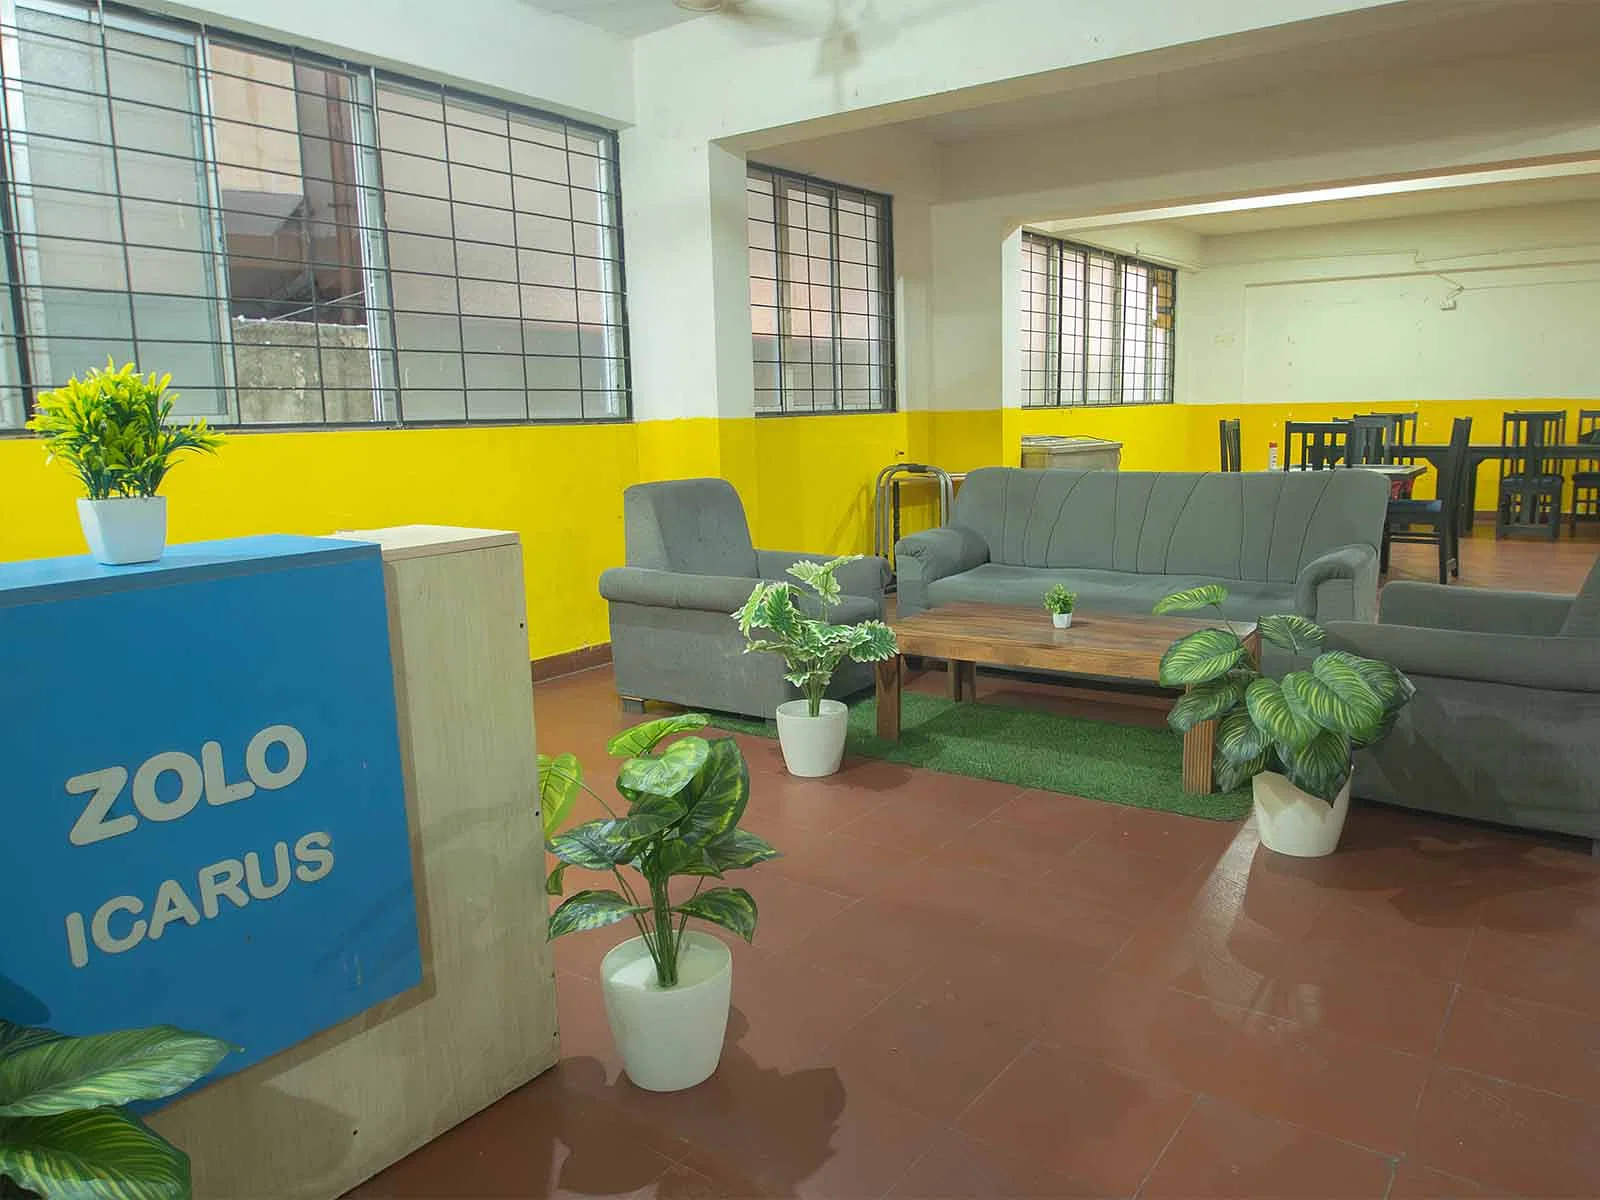 safe and affordable hostels for couple students with 24/7 security and CCTV surveillance-Zolo Icarus